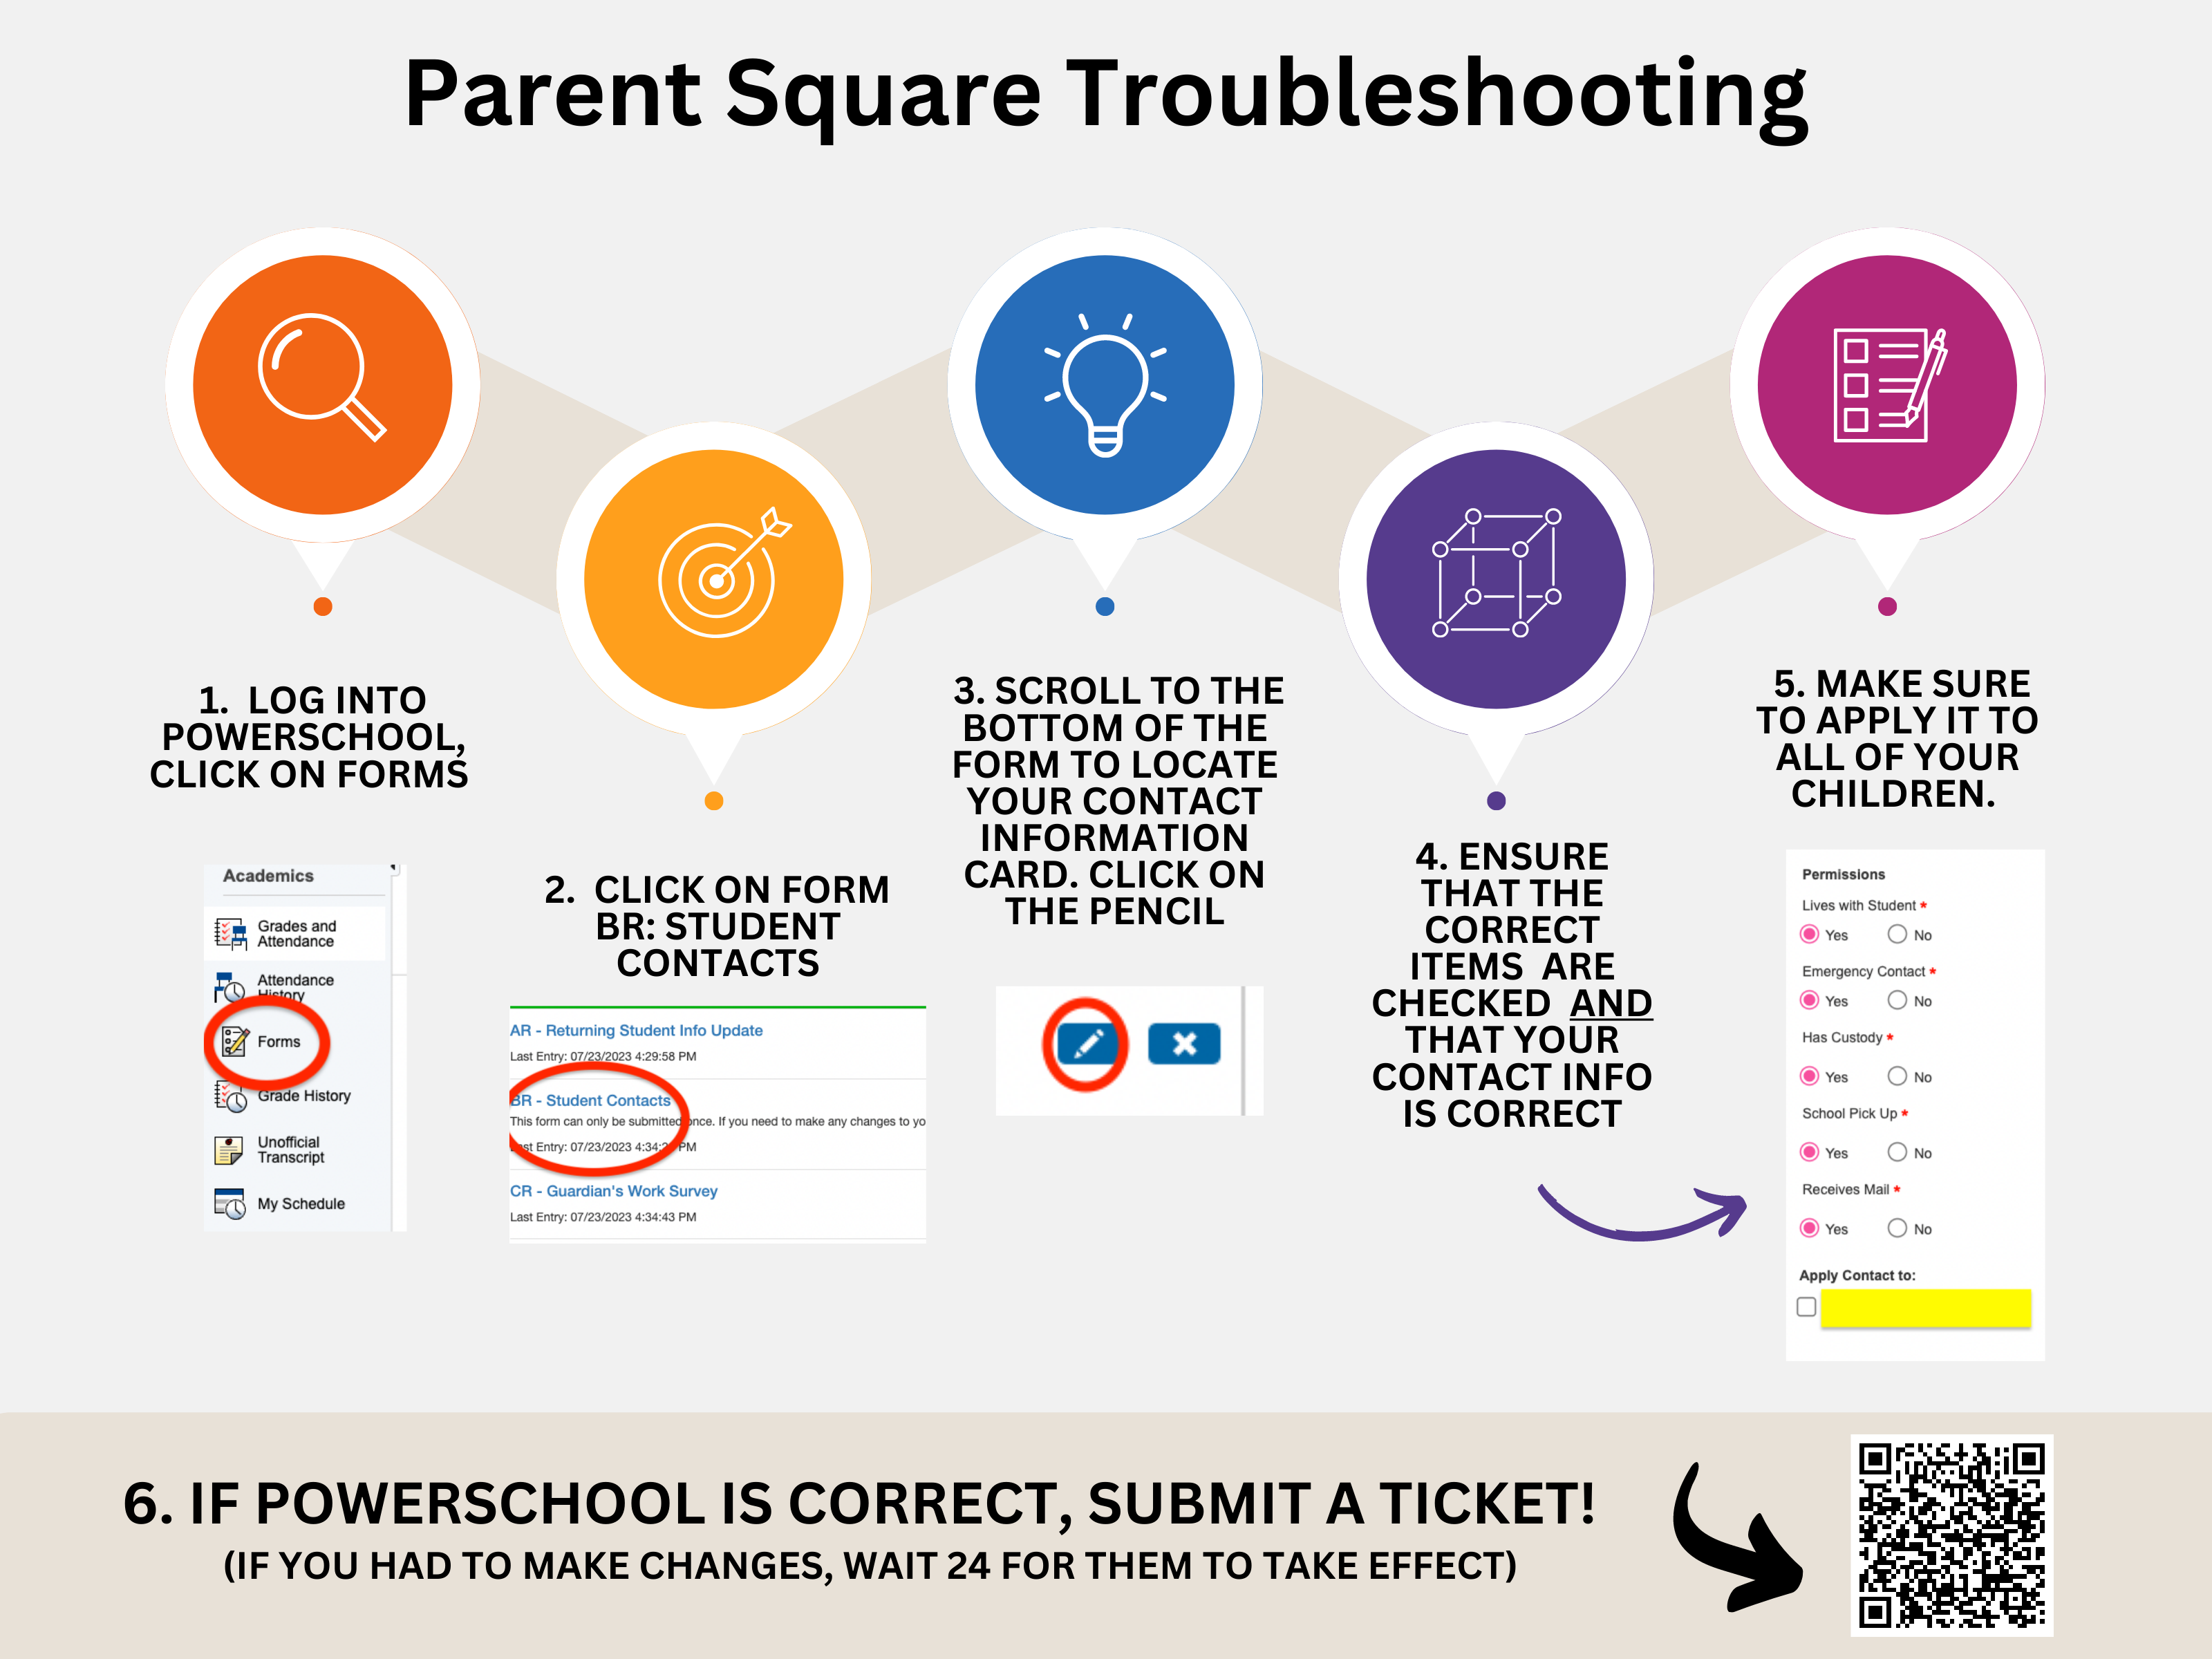 Troubleshooting guide